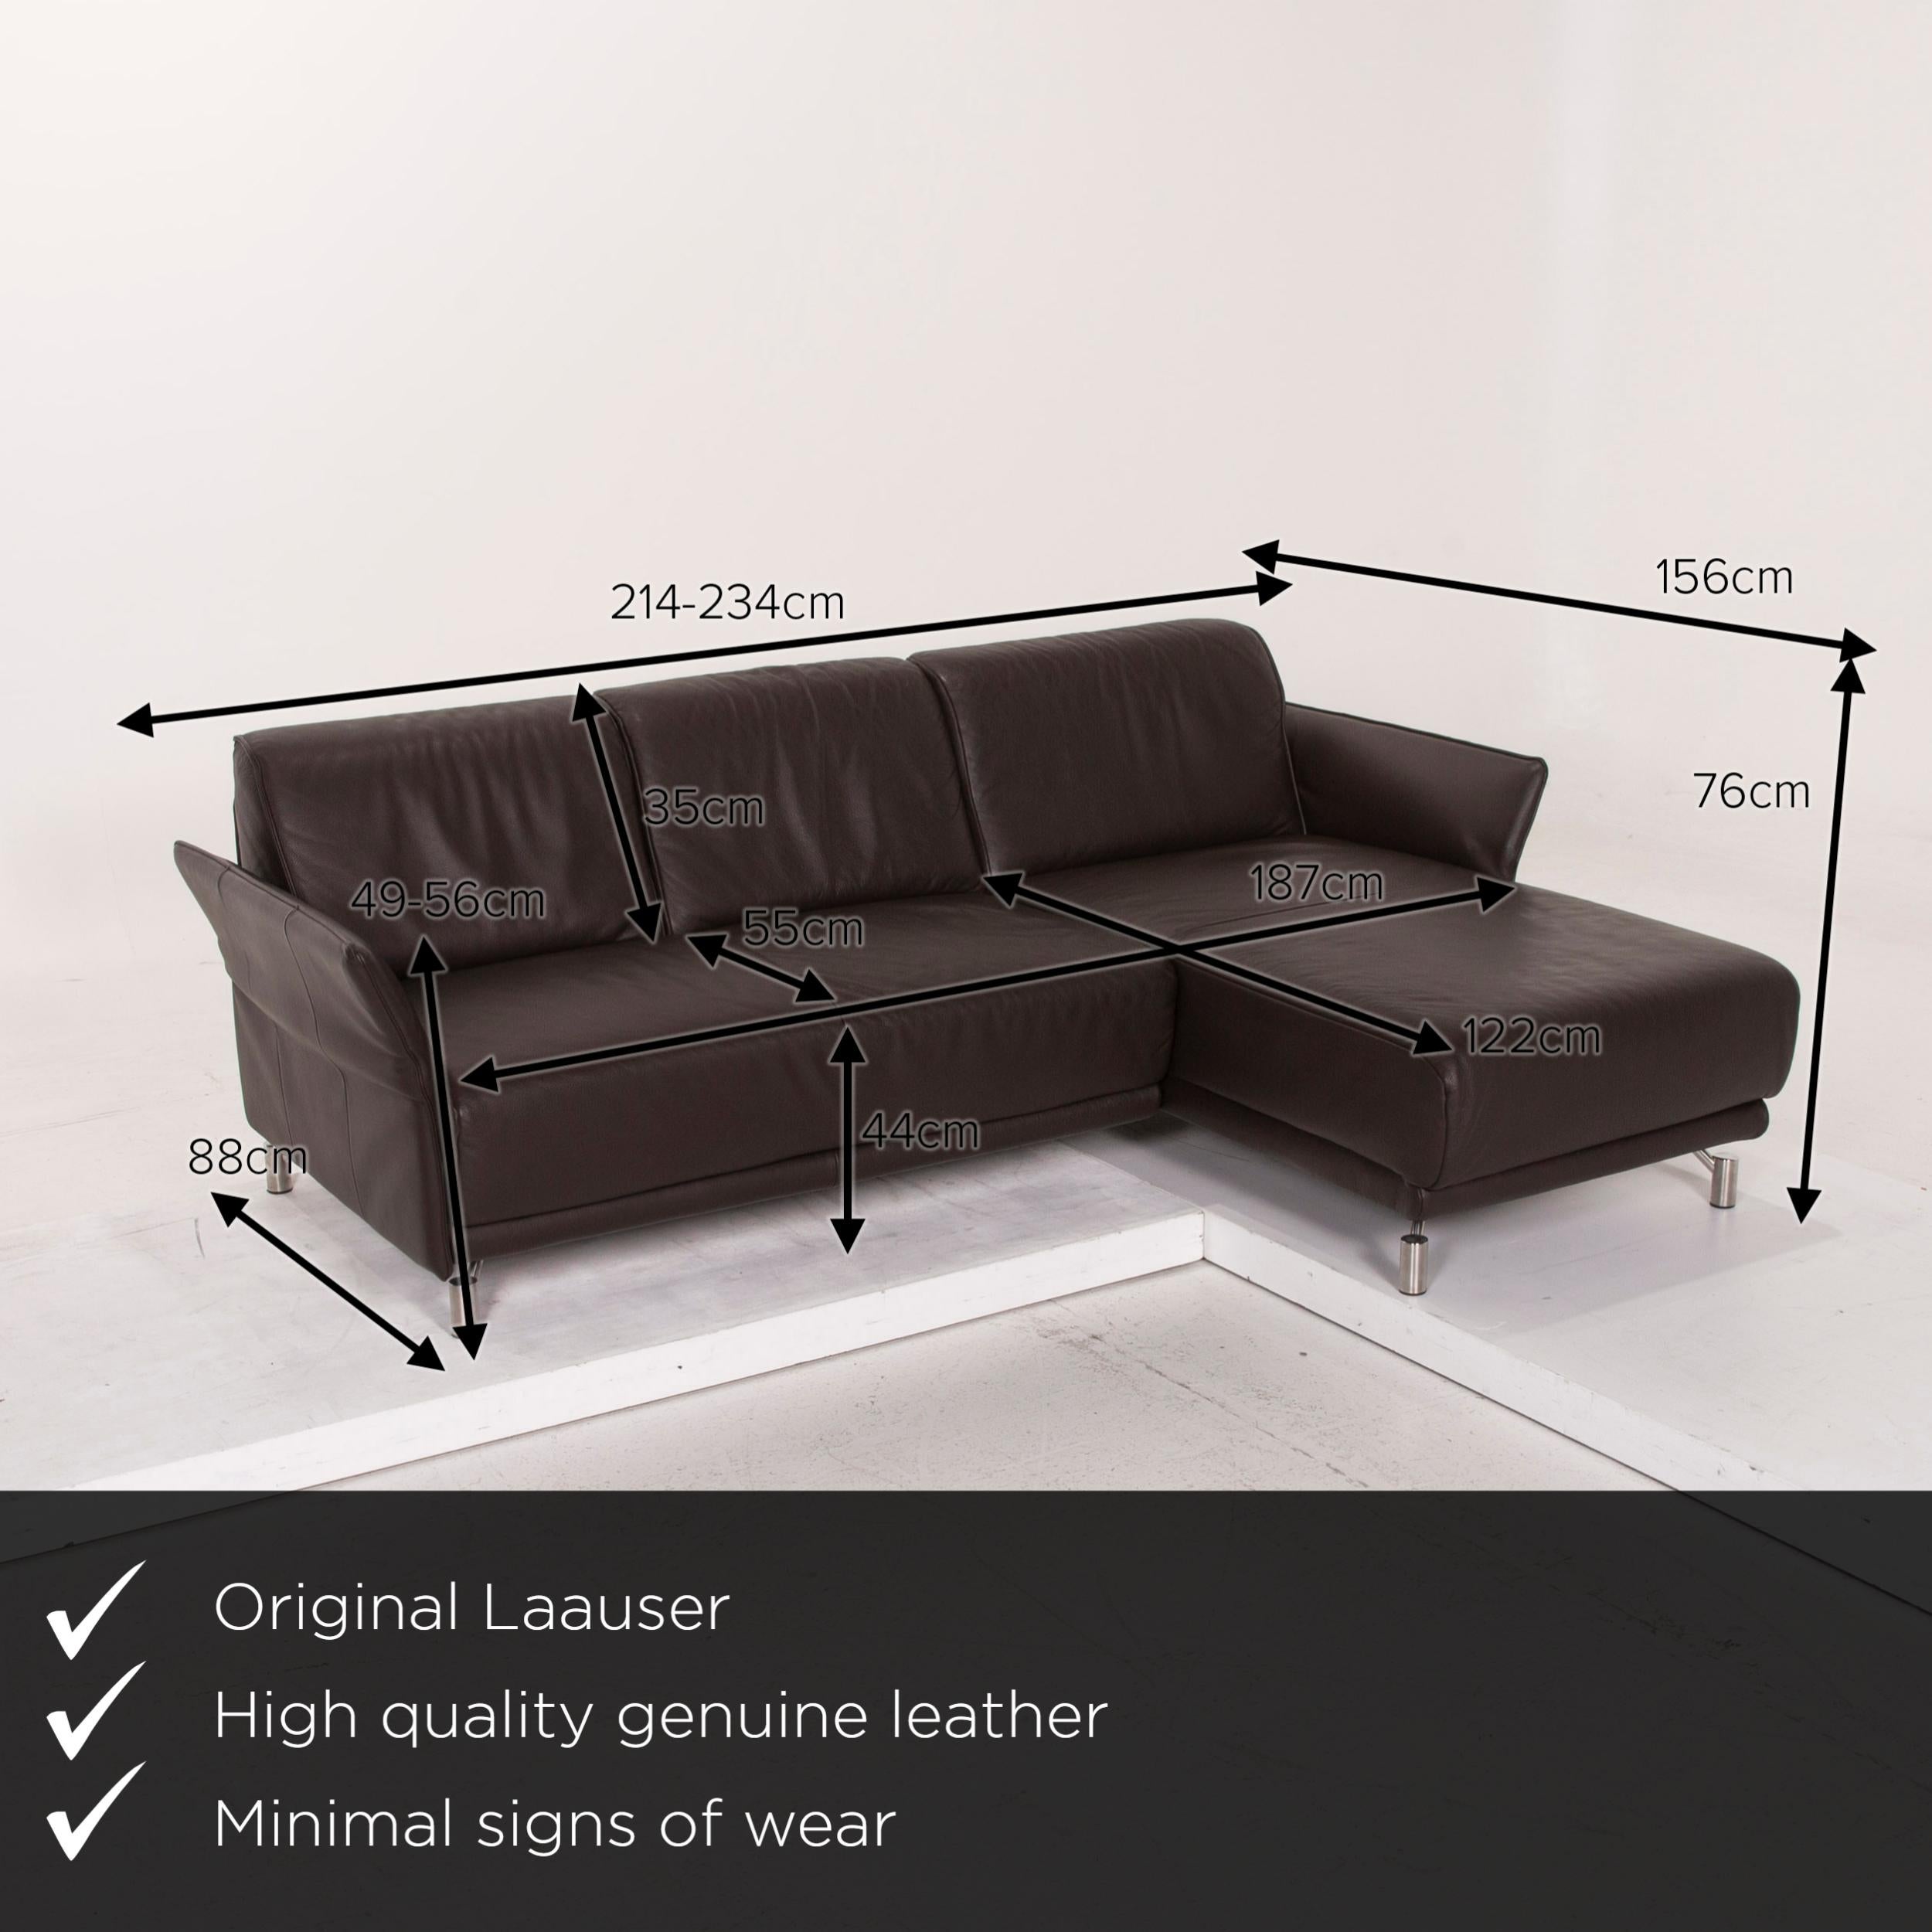 We present to you a Laauser leather sofa brown corner sofa dark brown.


 Product measurements in centimeters:
 

Depth 88
Width 214
Height 76
Seat height 44
Rest height 49
Seat depth 55
Seat width 187
Back height 35.
 